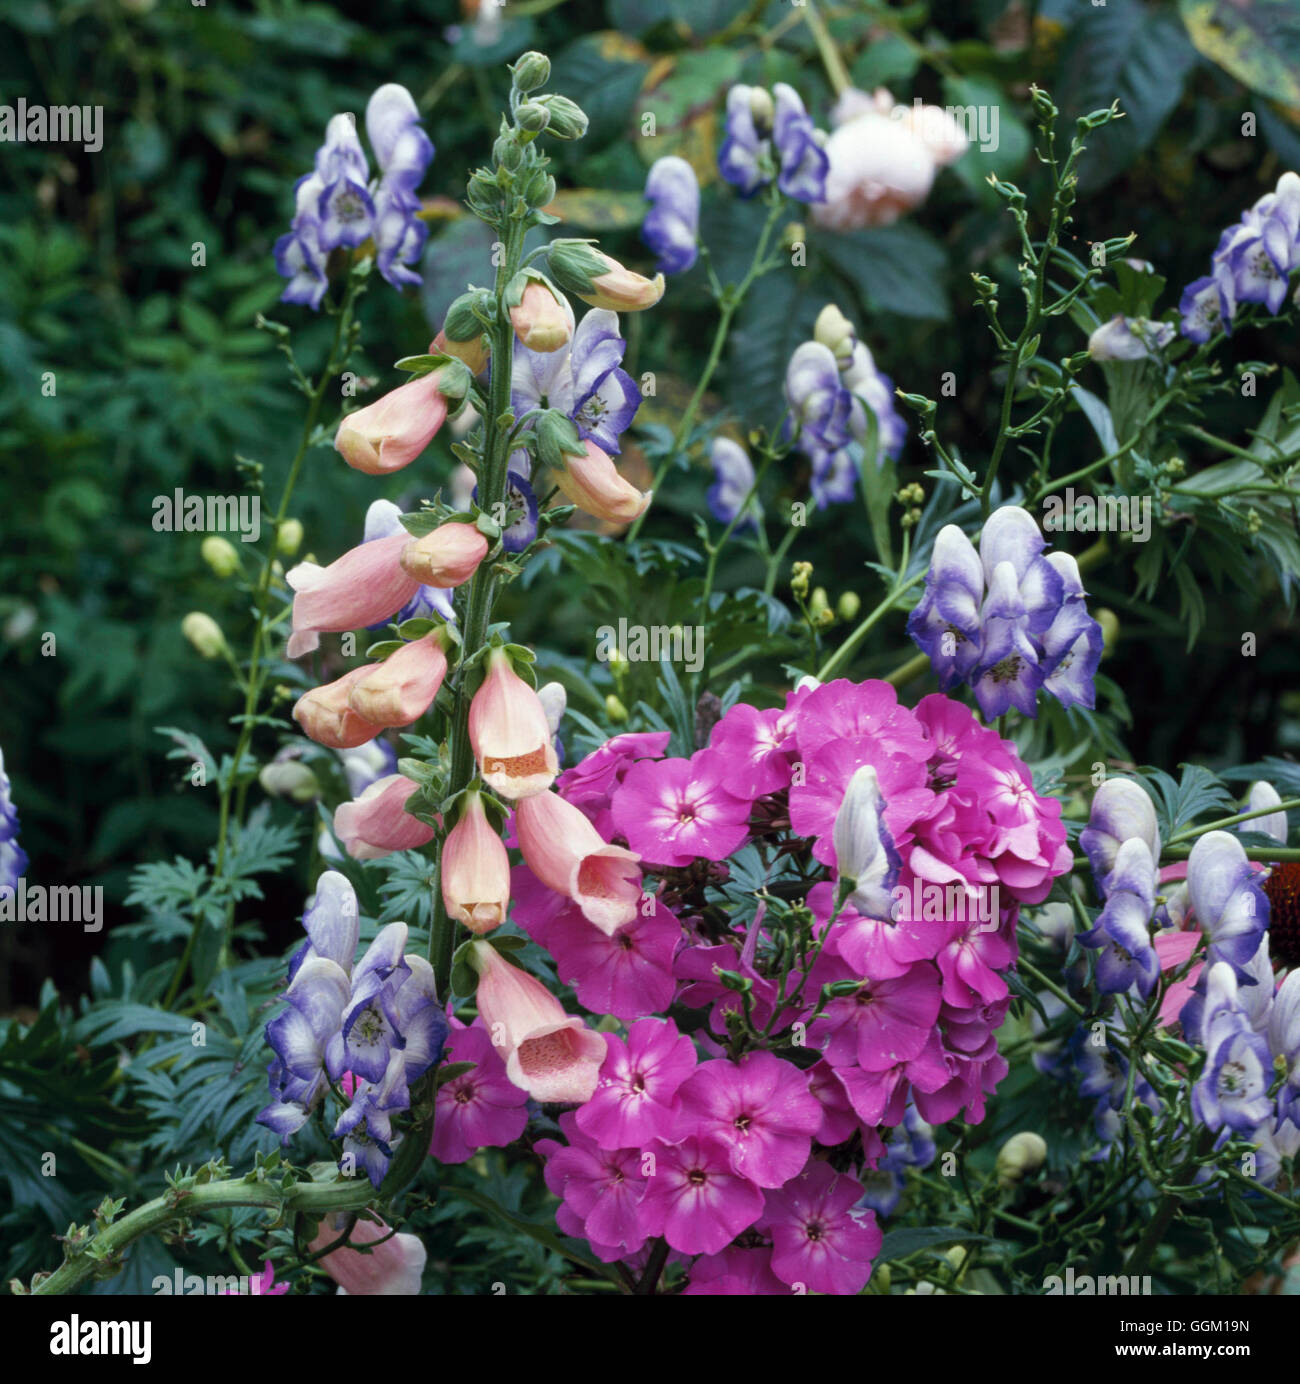 Plant Association - with Aconitum  Digitalis and Phlox - (Please credit: Photos Horticultural/ Glen Chantry  NGS)   PA Stock Photo